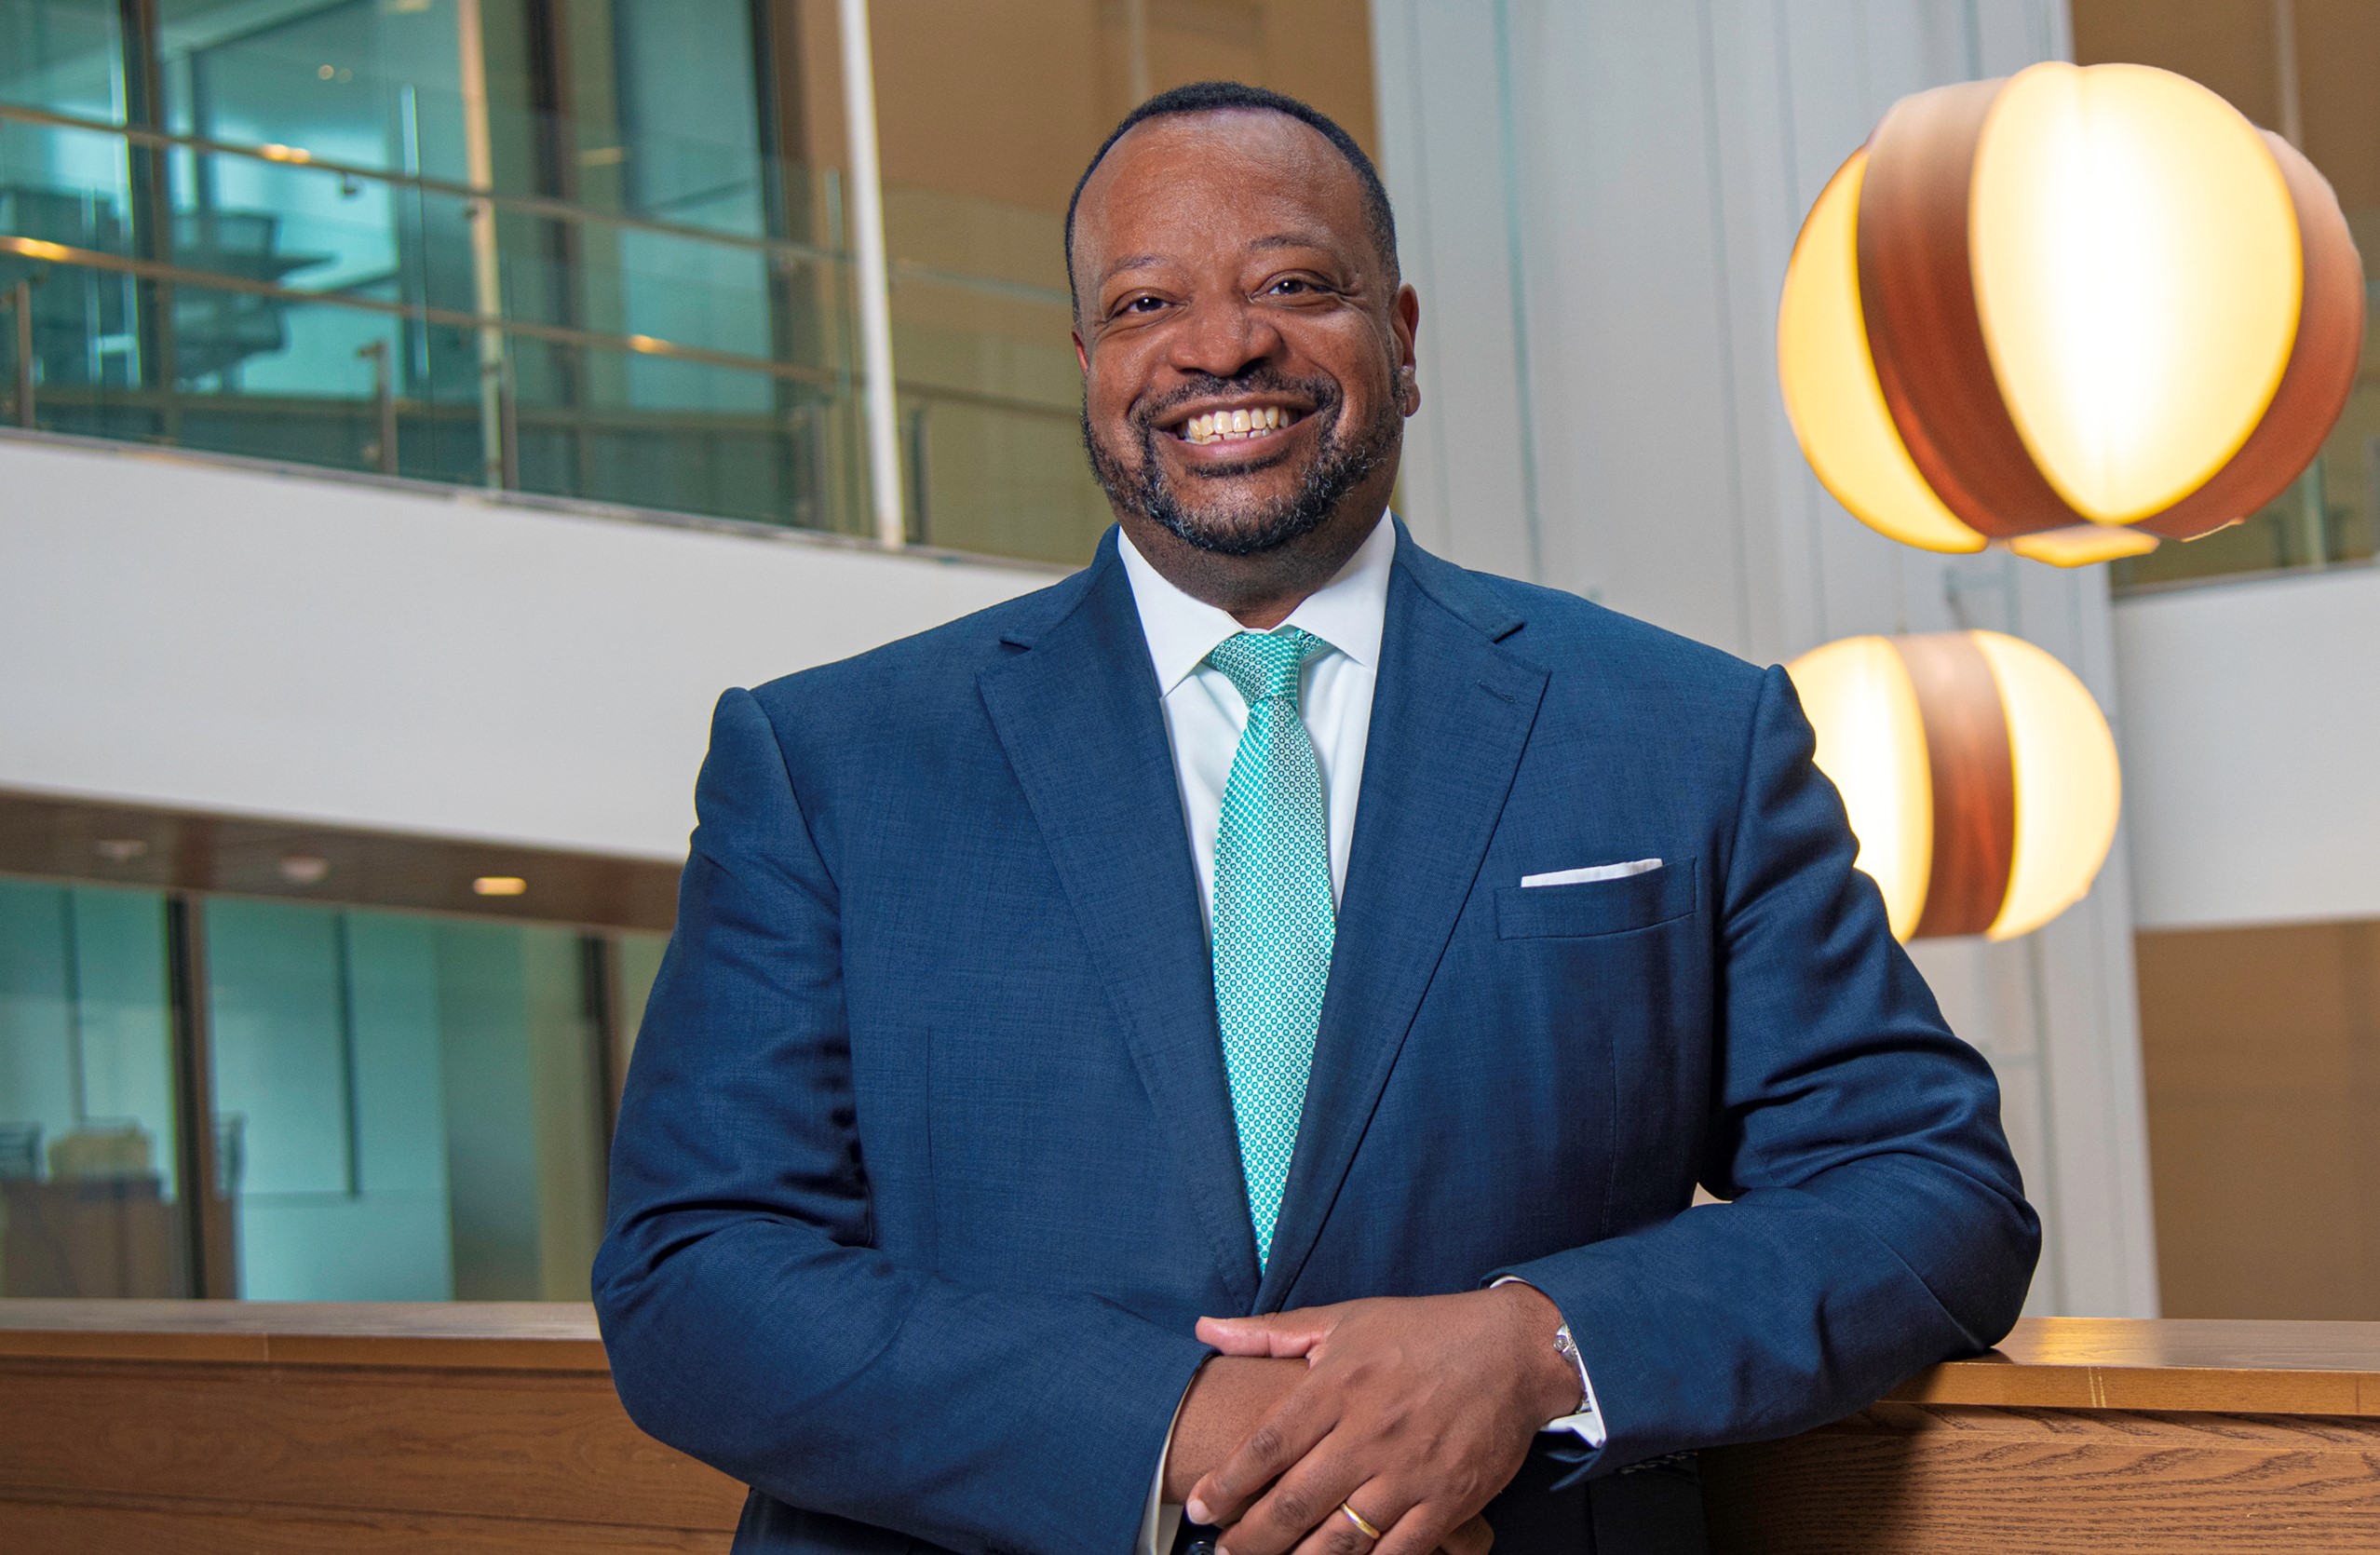 Dean Fairfax joins Lawyers’ Committee for Civil Rights Under Law Board of Directors